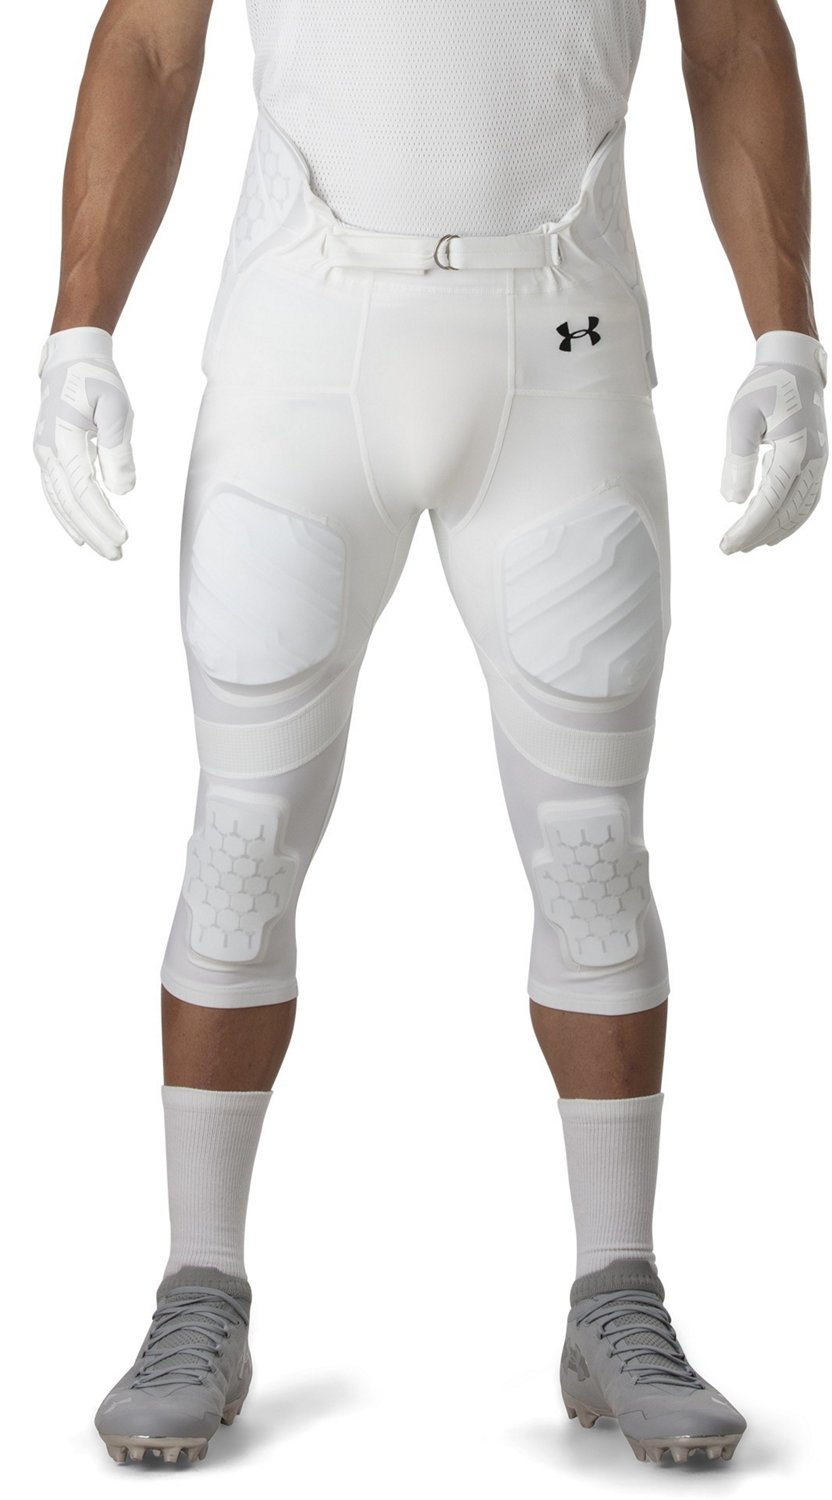 Under Armour Men's Gameday Integrated Football Pants Academy